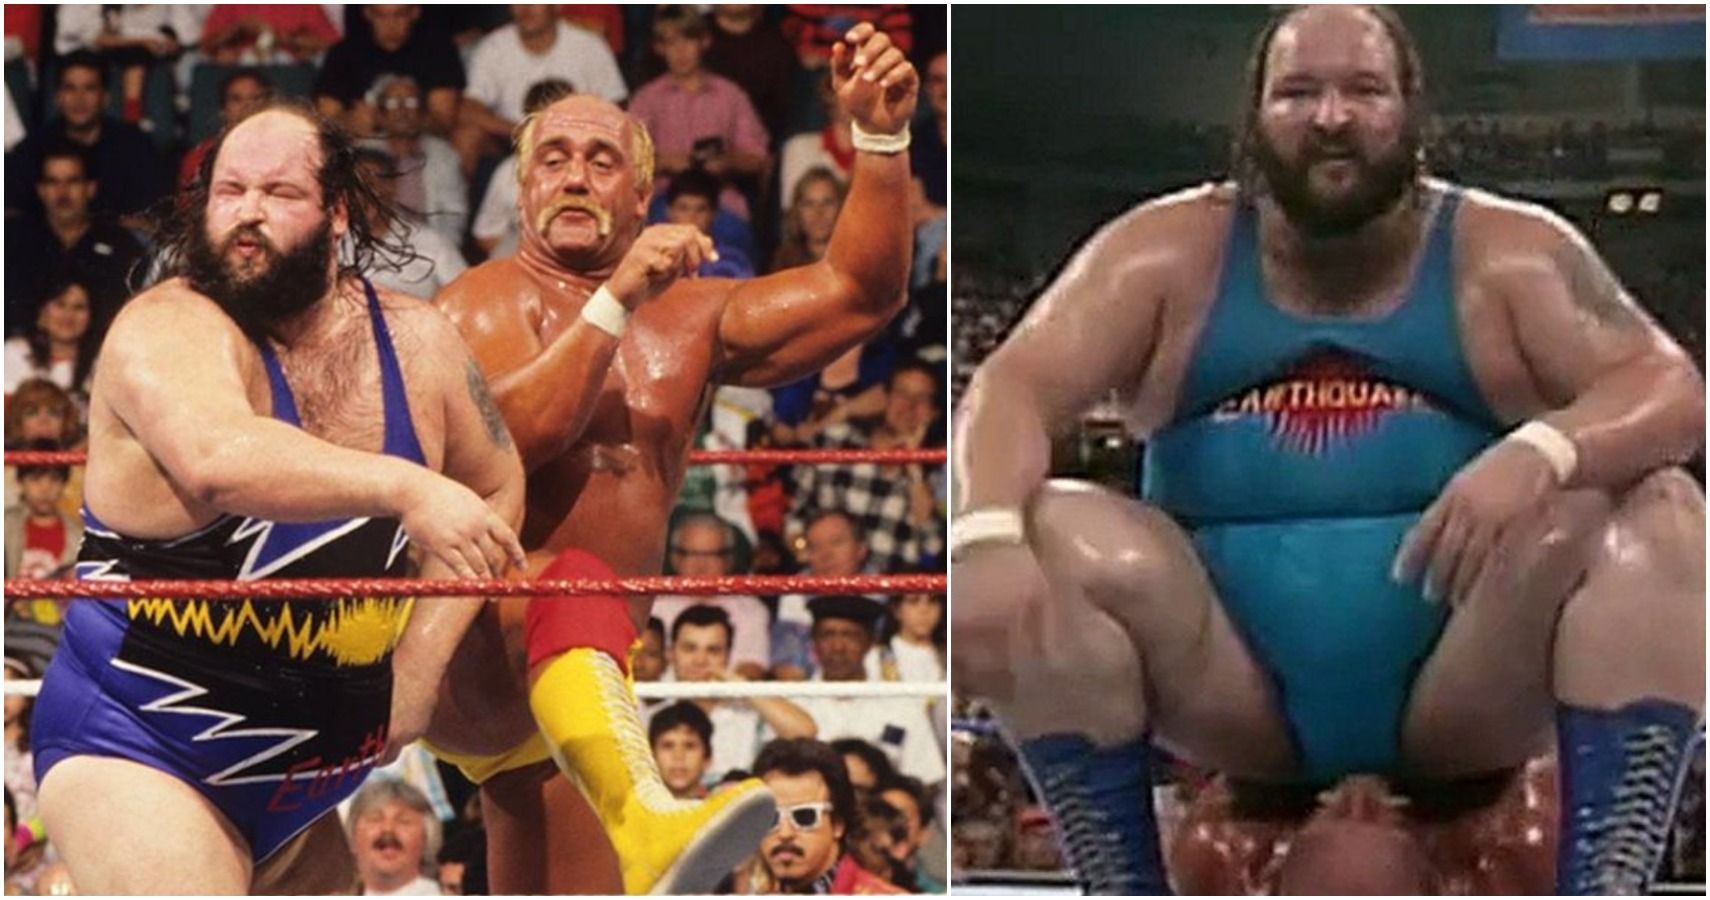 Hulk Hogan Earthquake: 10 Things Most Fans Realize About Their Rivalry, 30 Years Later